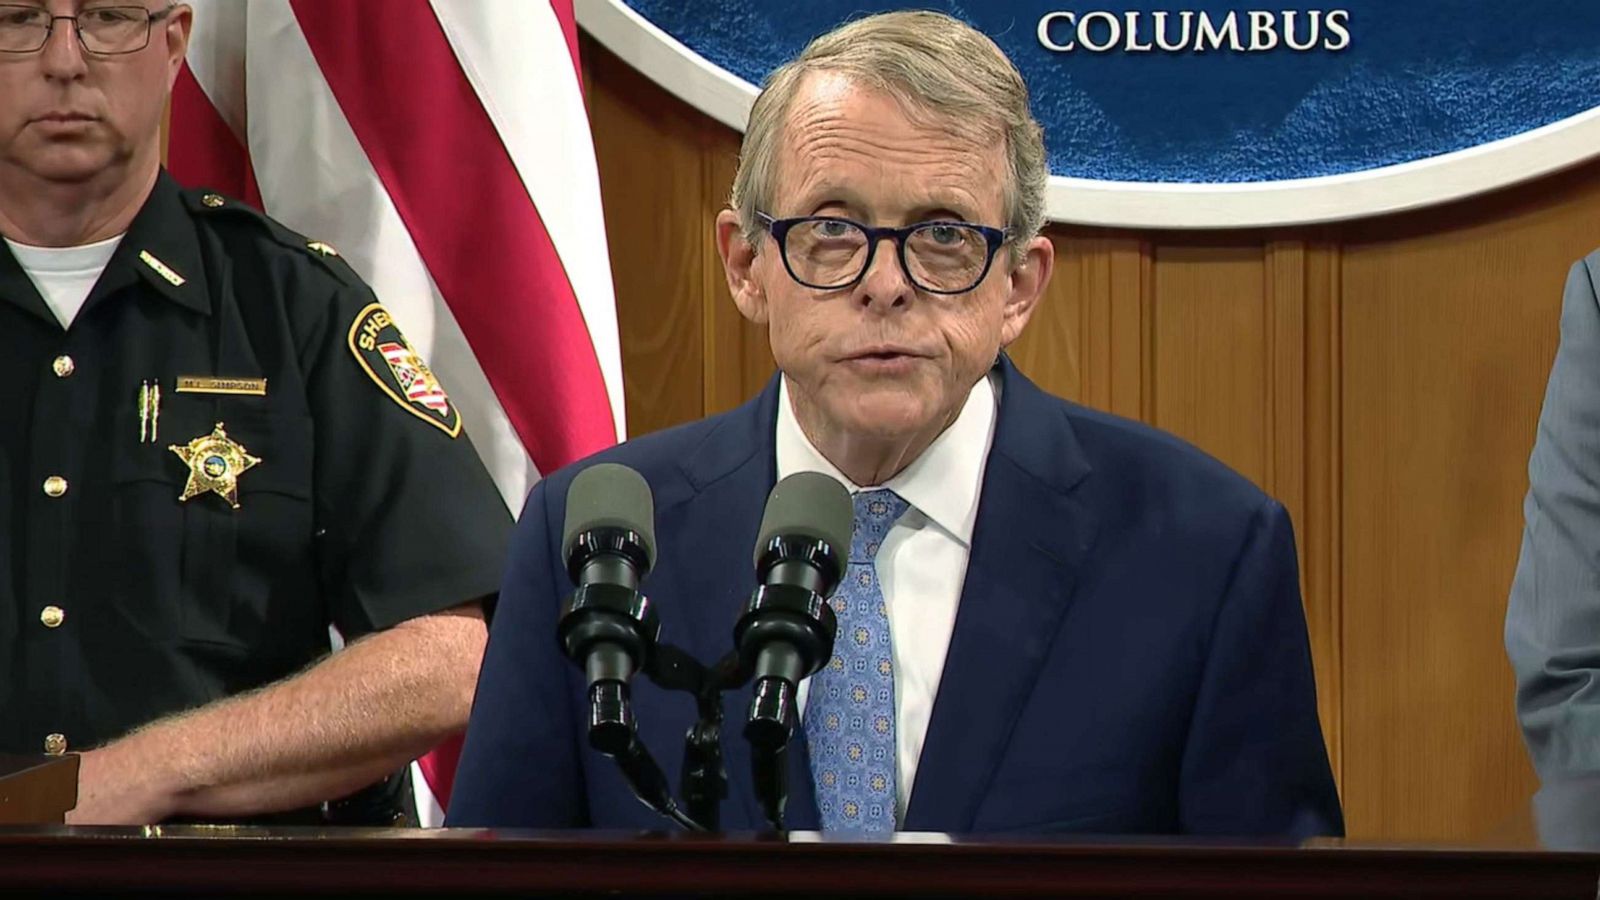 Ohio governor pushes to strengthen background checks after Dayton shooting  - ABC News